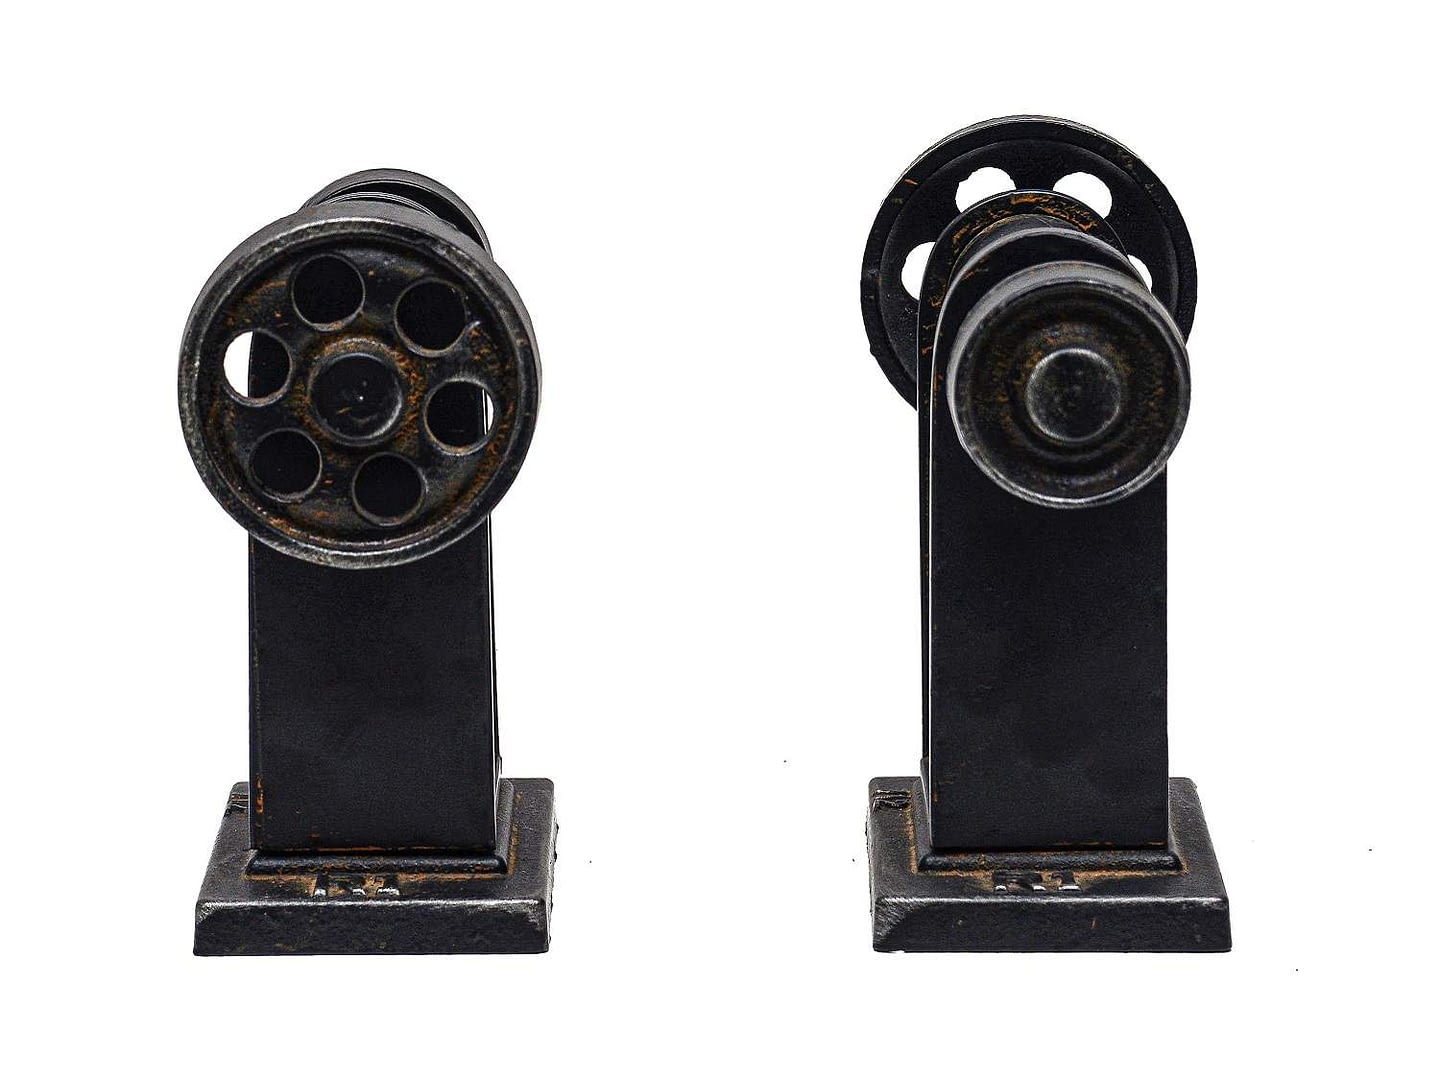 Sewing Machine Bookends - Set of 2